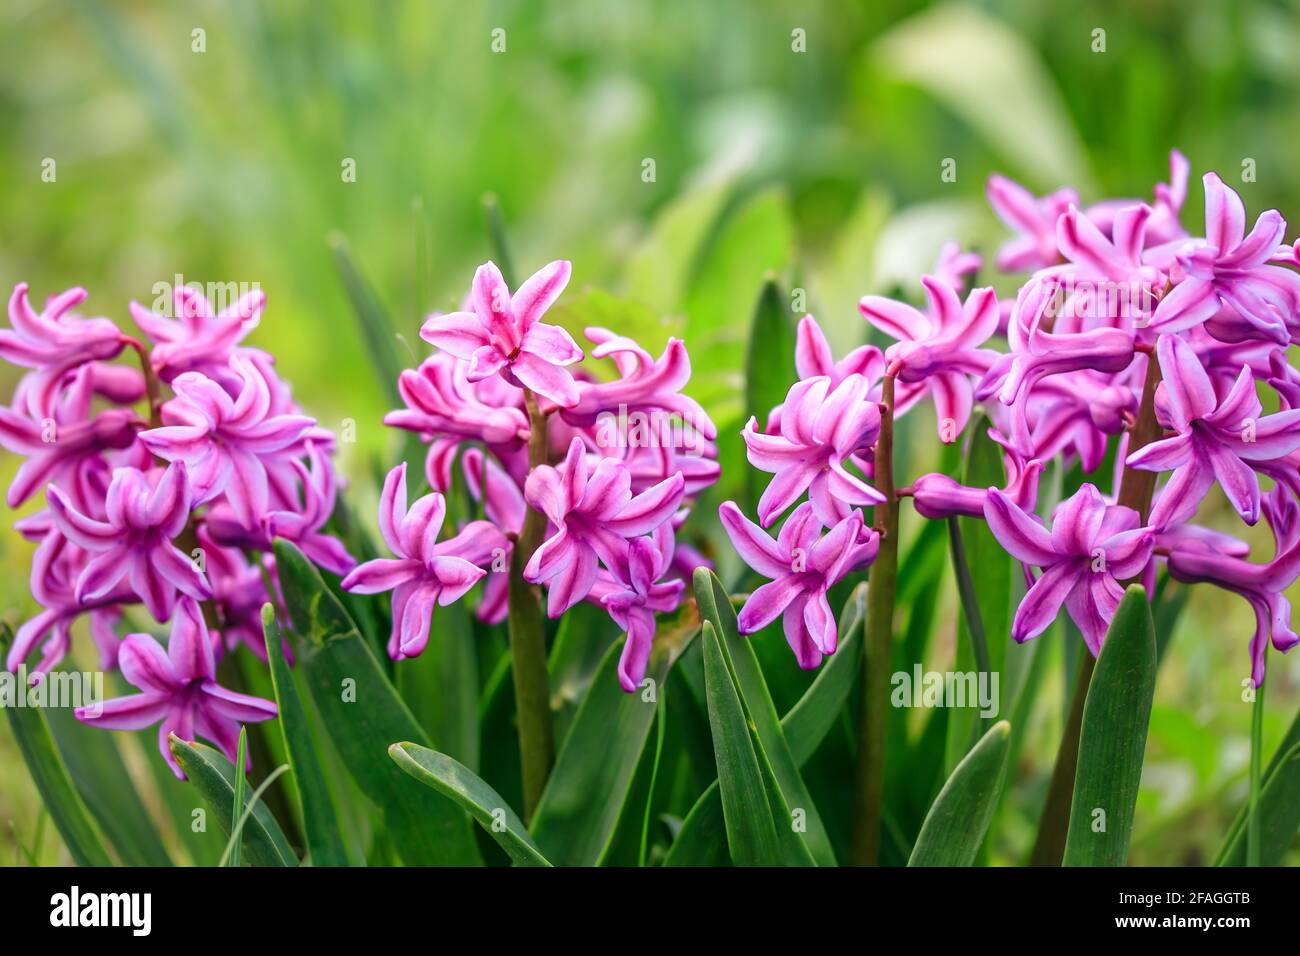 Hyacinthus orientalis in garden, common hyacinth in spring. Magenta flowers, floral pattern, nature background. Pink blossom, growing plant. Selective Stock Photo